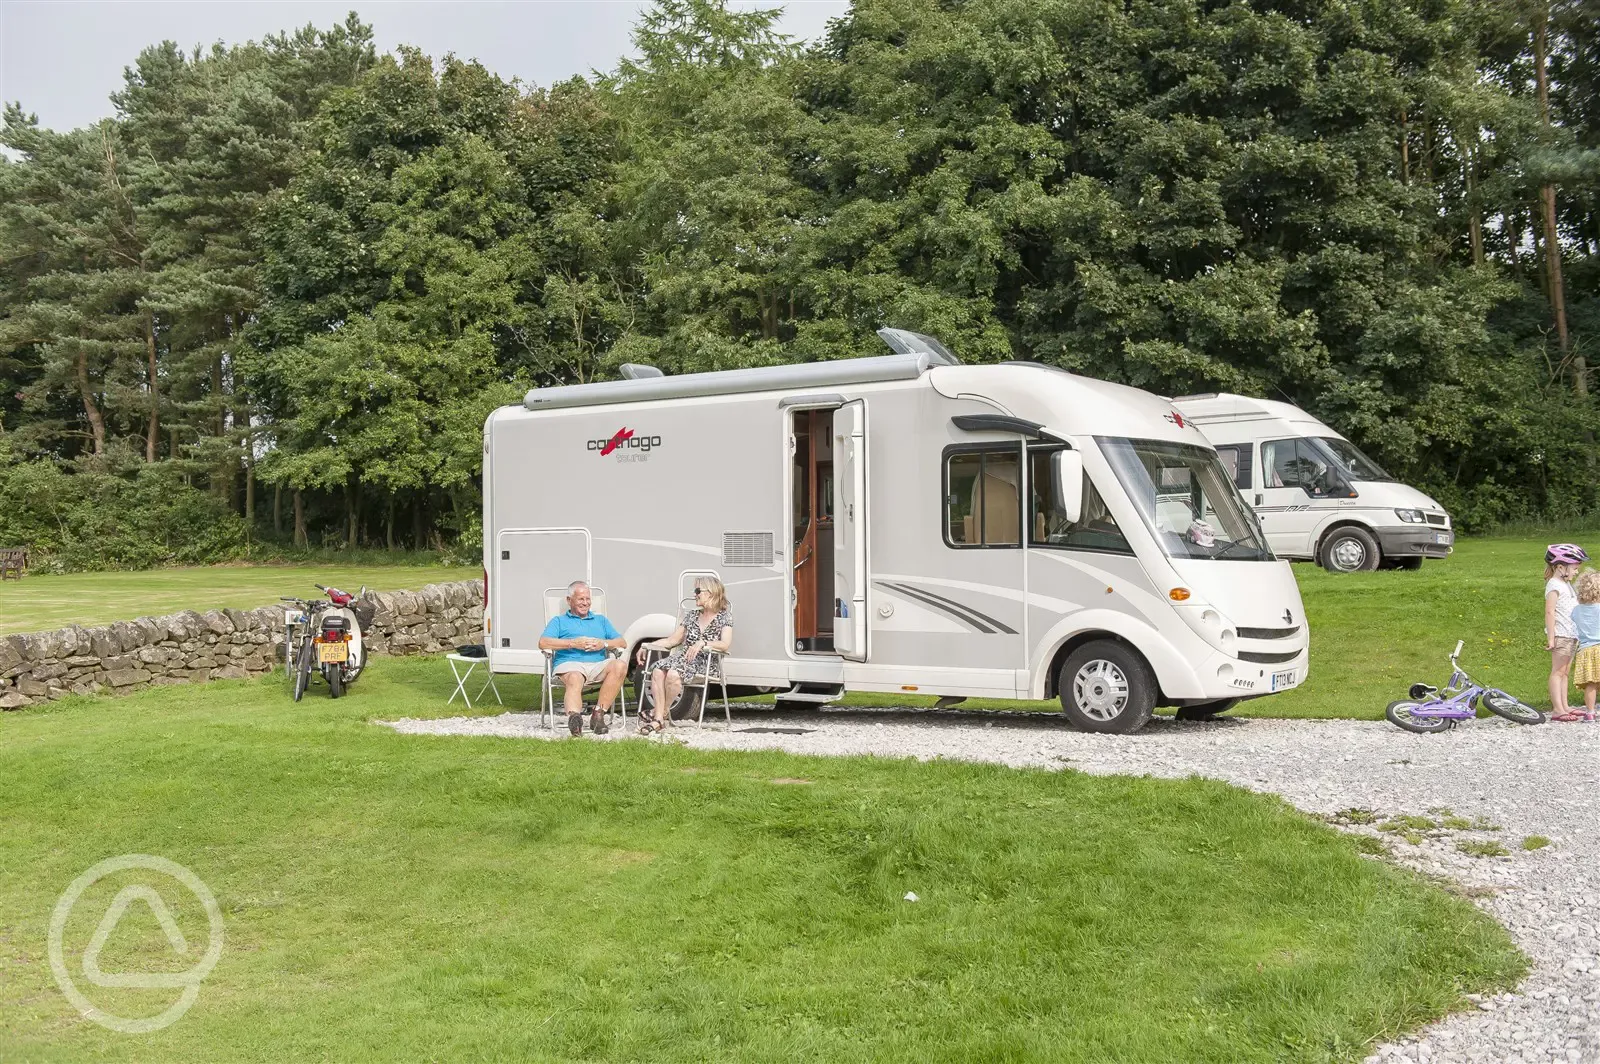 Motorhome at Bakewell